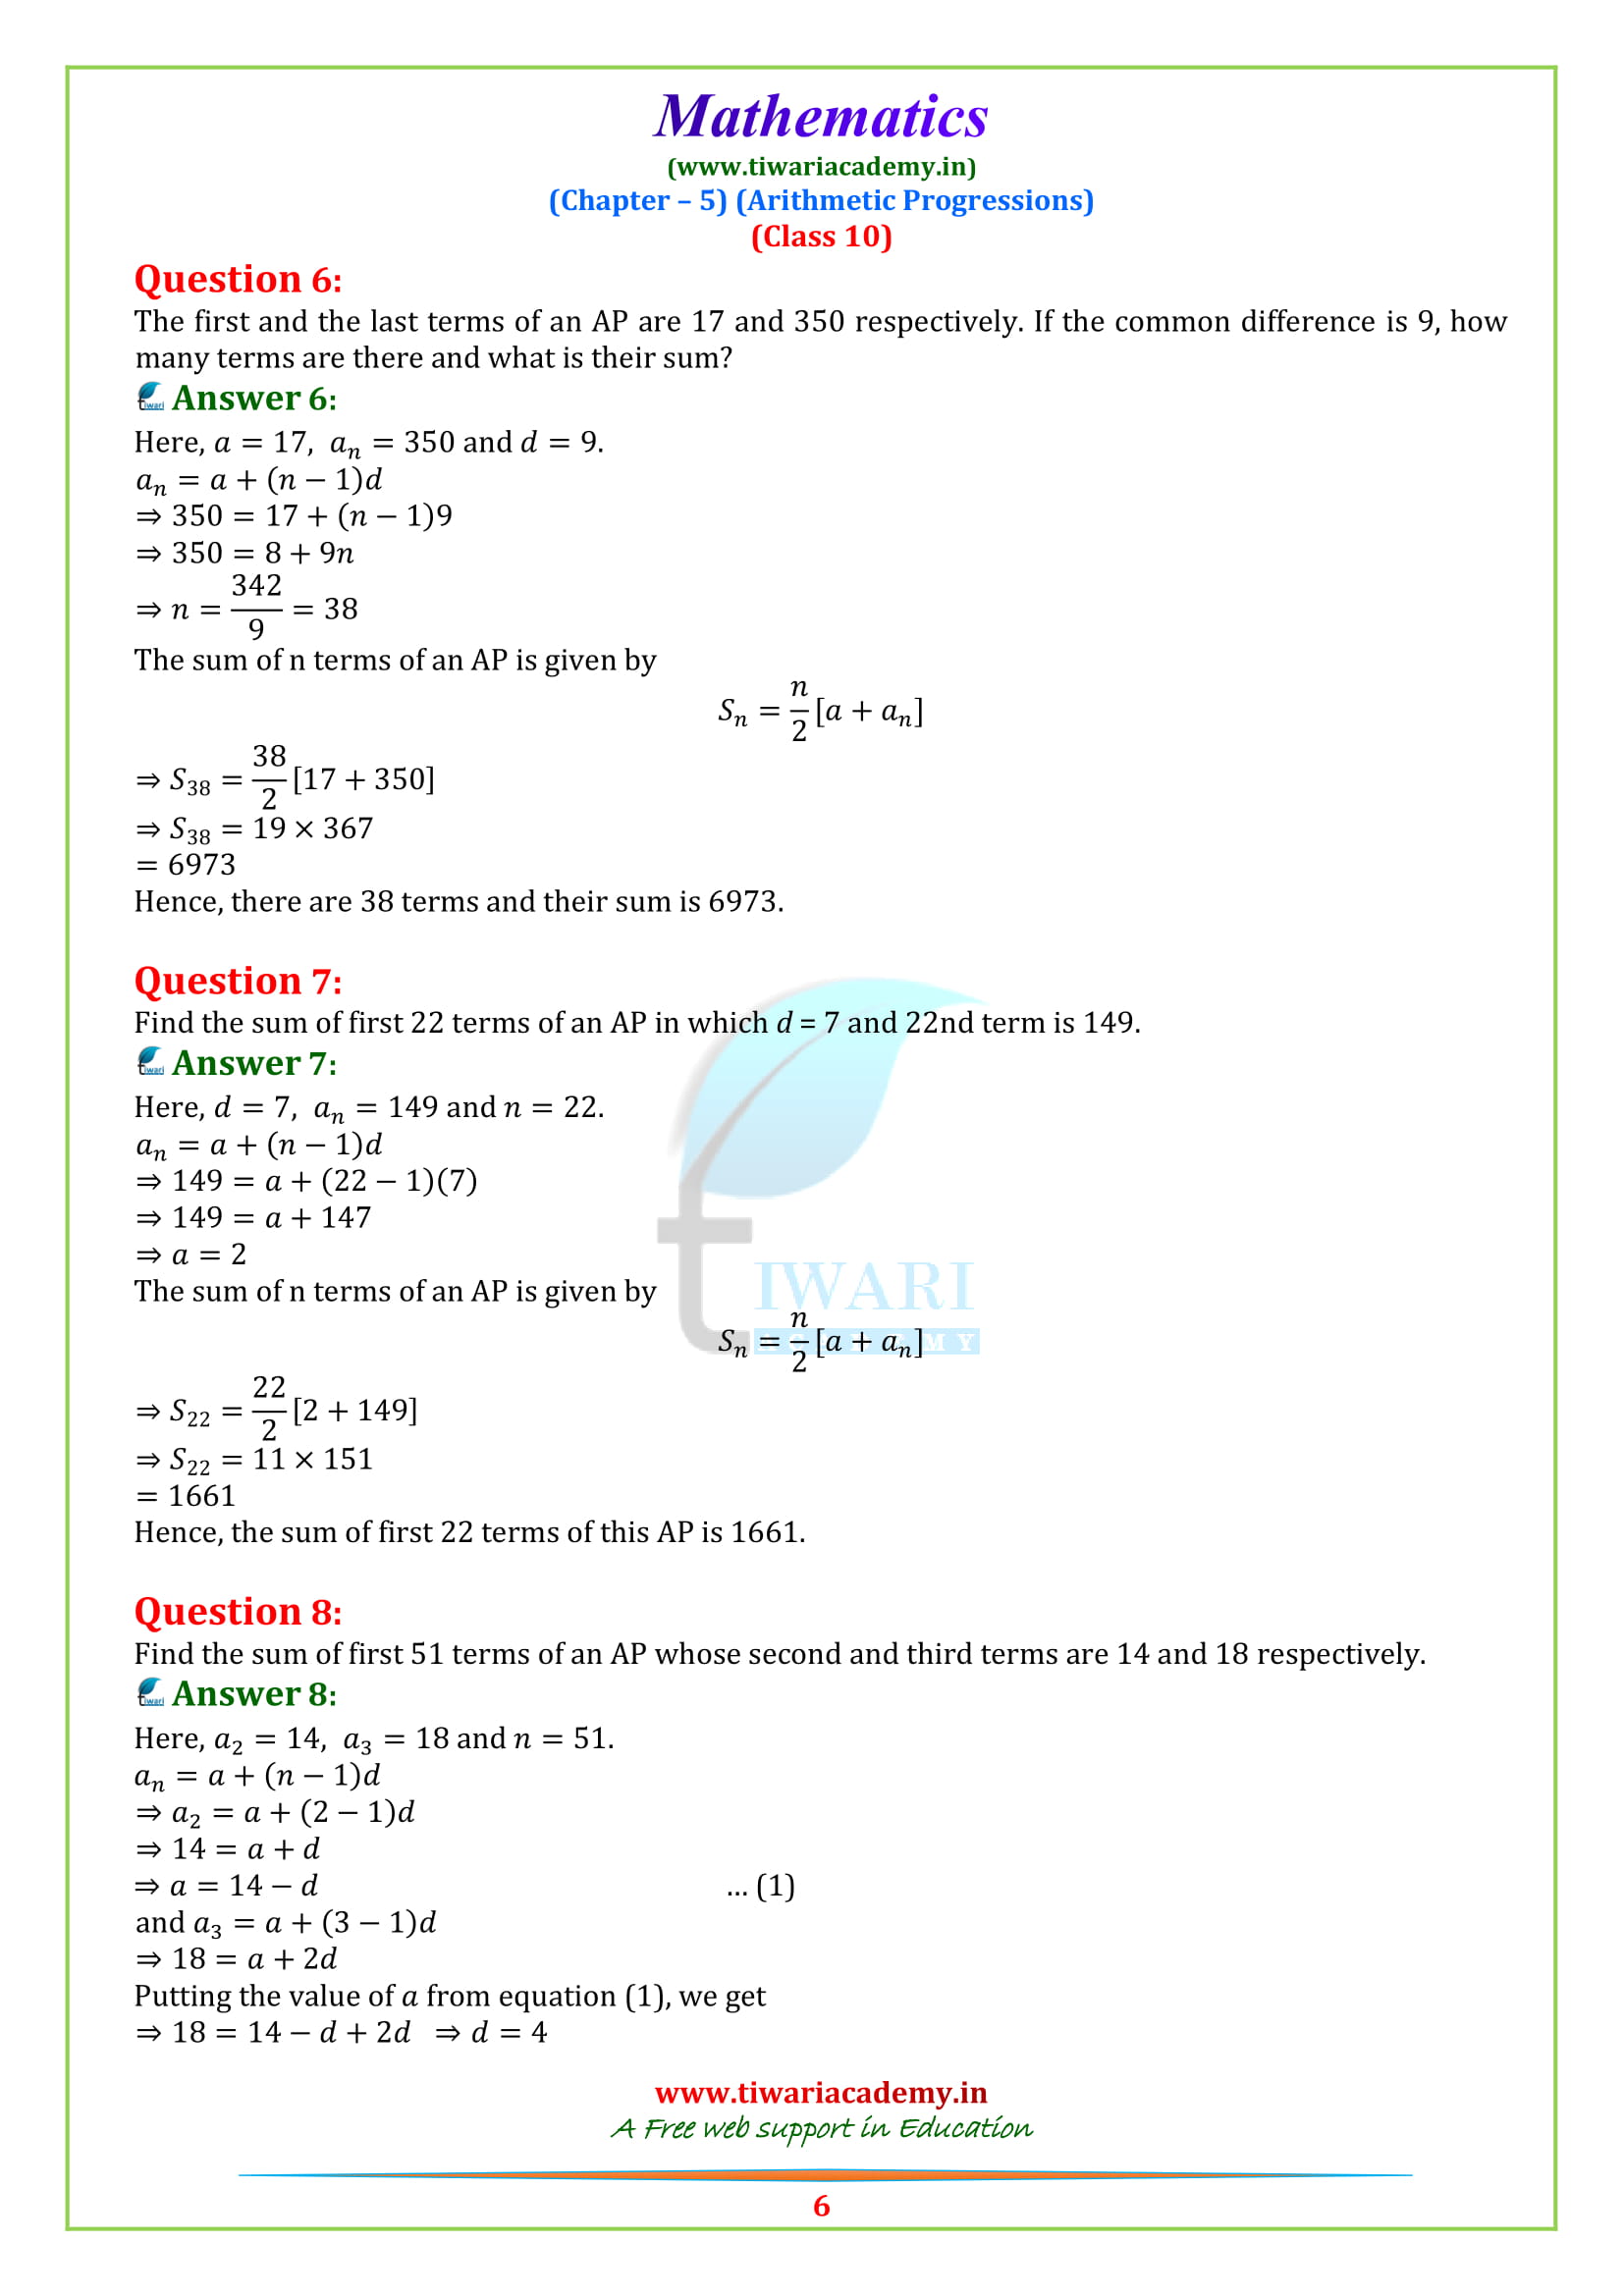 NCERT Sols for class 10 Maths exercise 5.3 updated for 2020 – 2021.